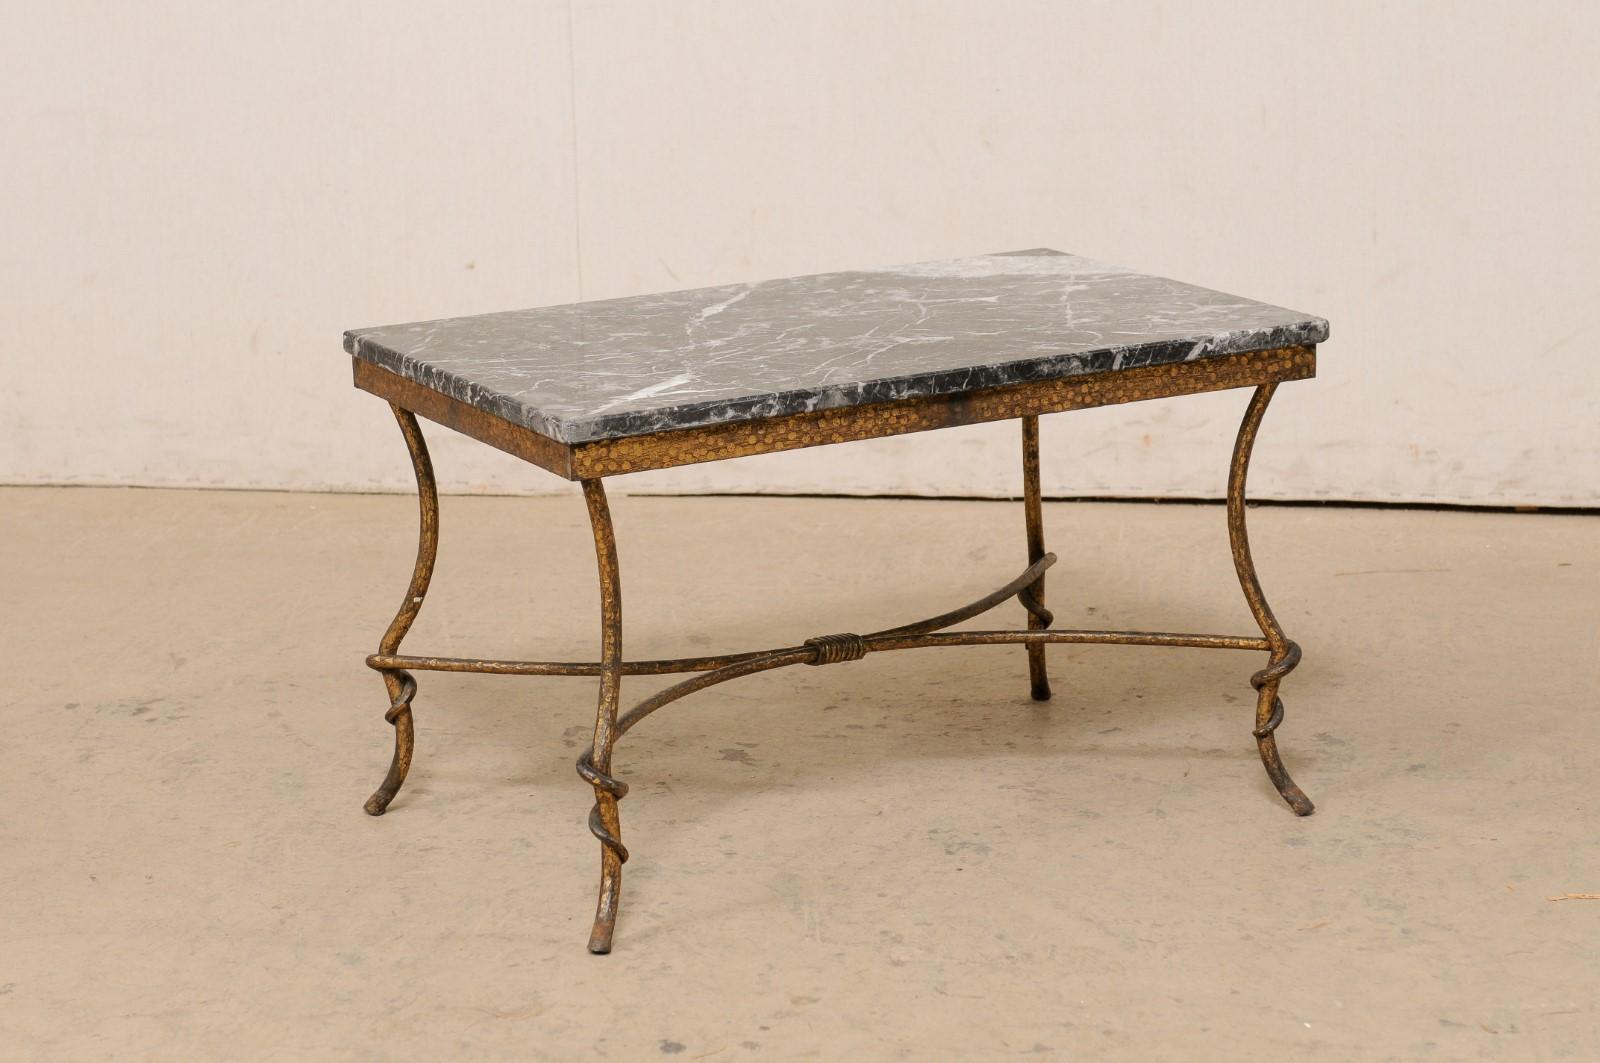 A Spanish marble-top coffee table from the mid 20th century. This vintage table from Spain has a rectangular-shaped marble top, which rests atop a hammered iron frame. The underside of this table is open and airy. The four thin, rounded legs are set